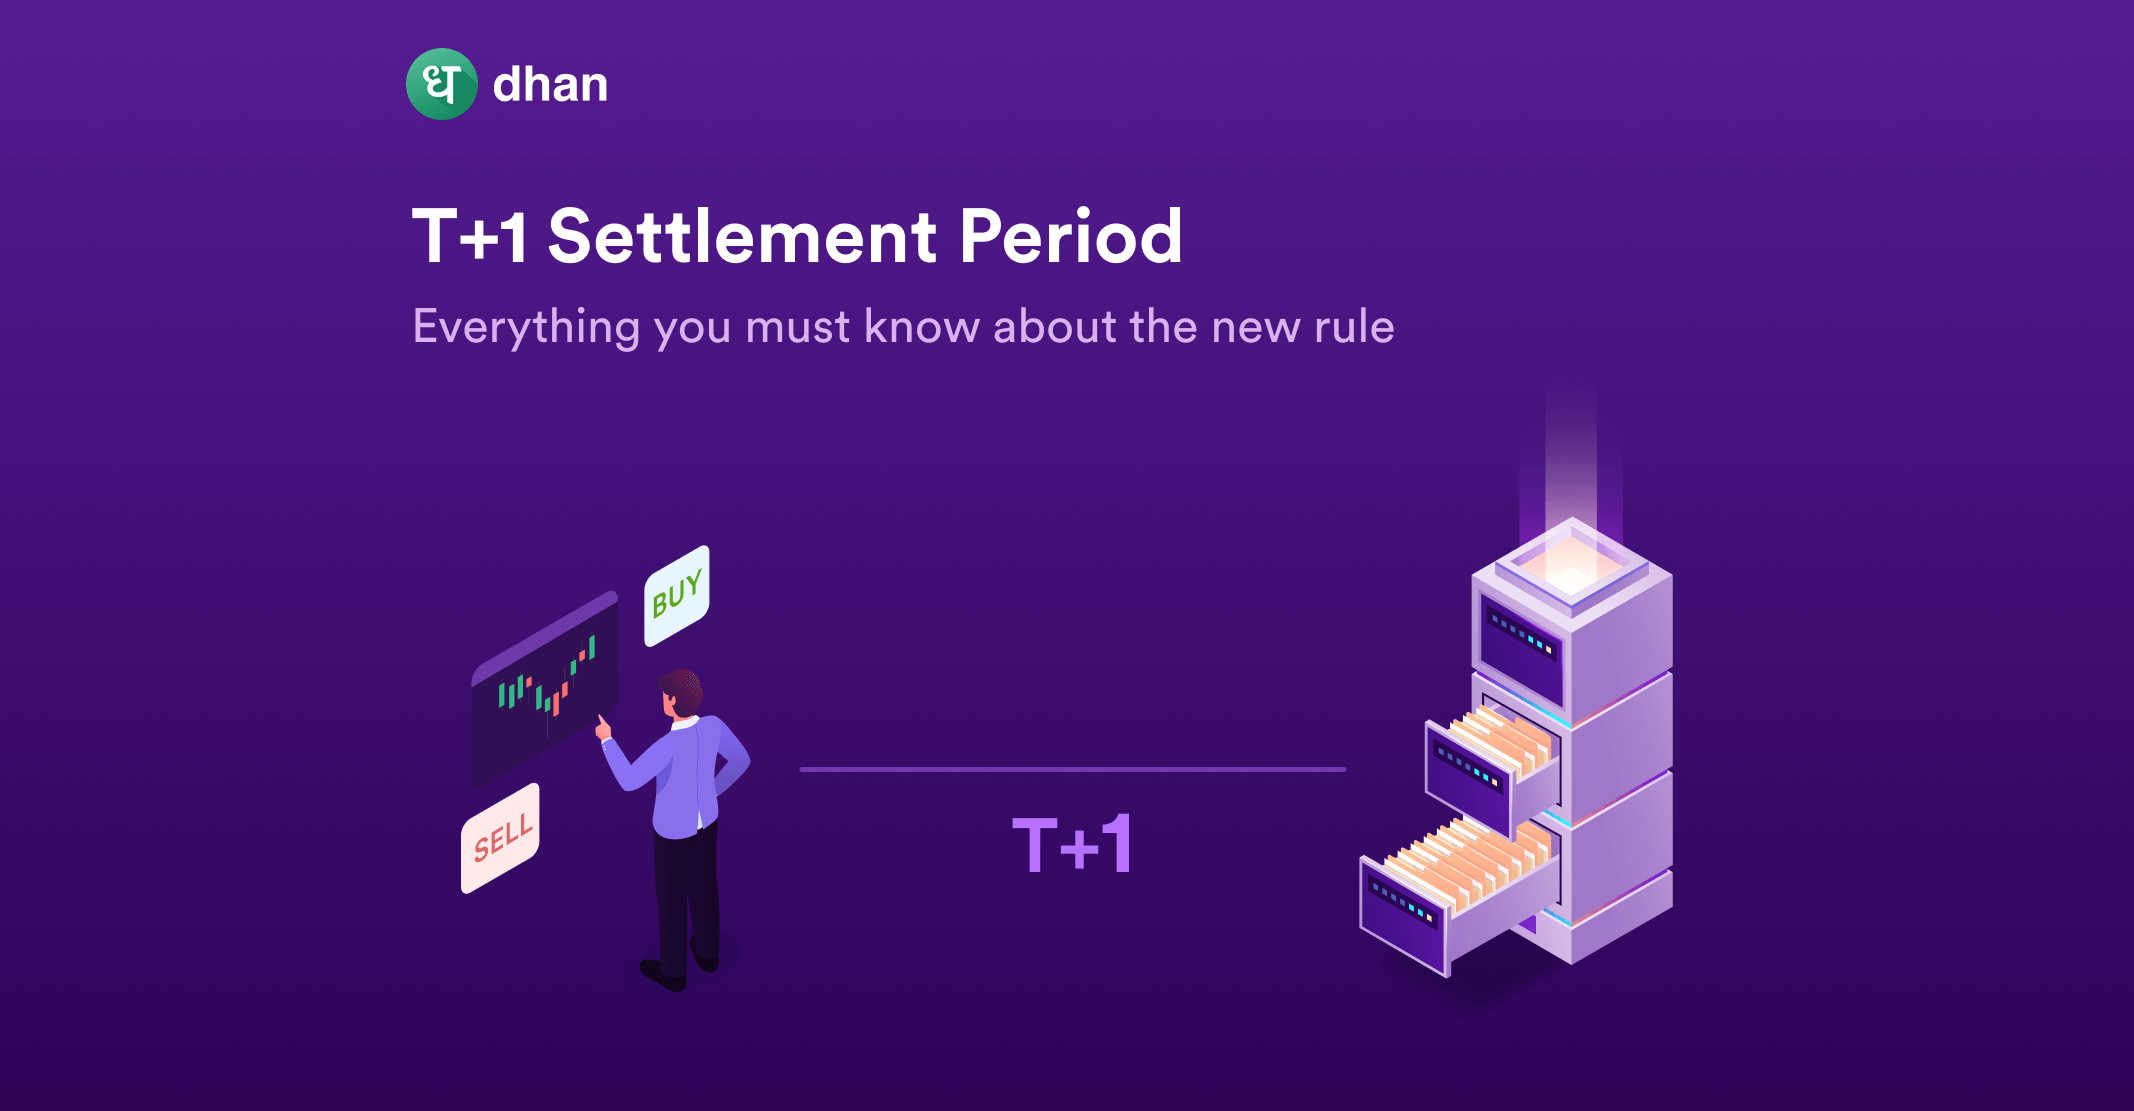 T+1 Settlement Period - Everything You Must Know